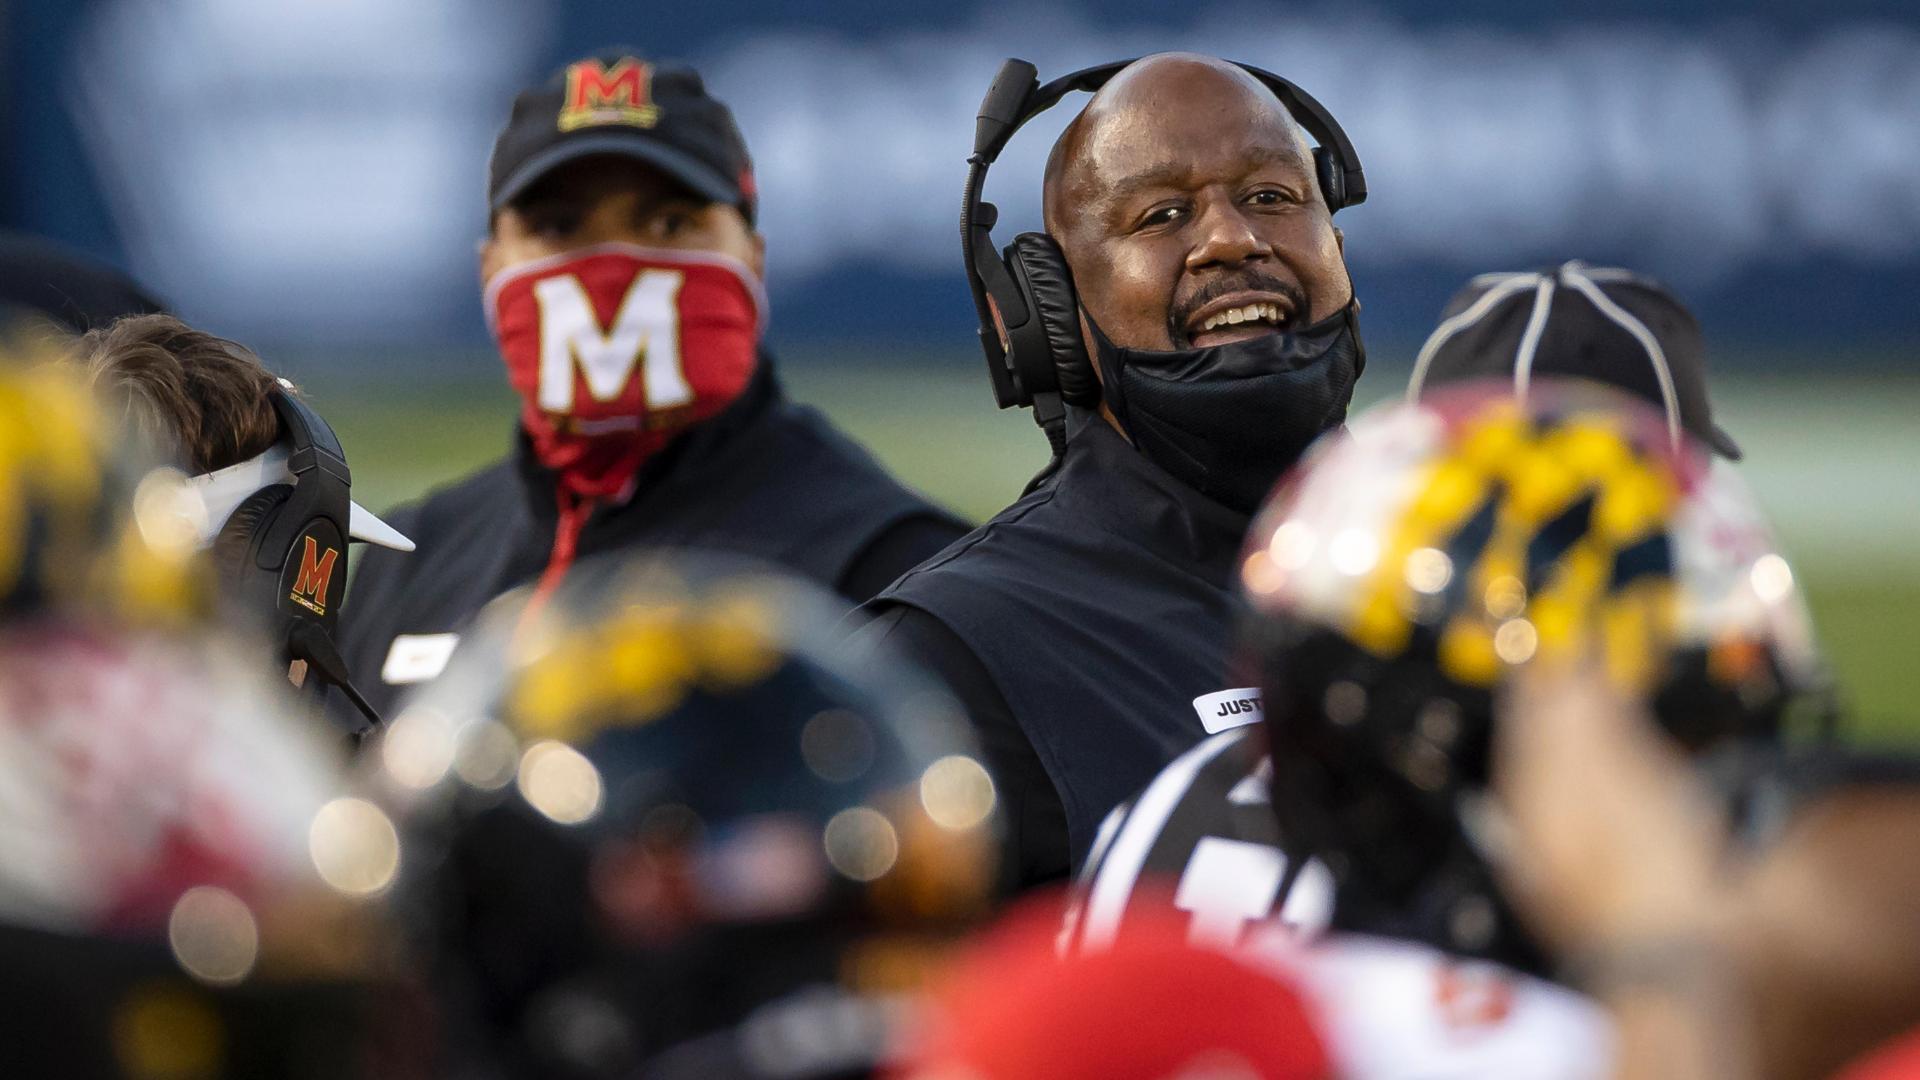 Maryland focusing on defense in Class of 2021